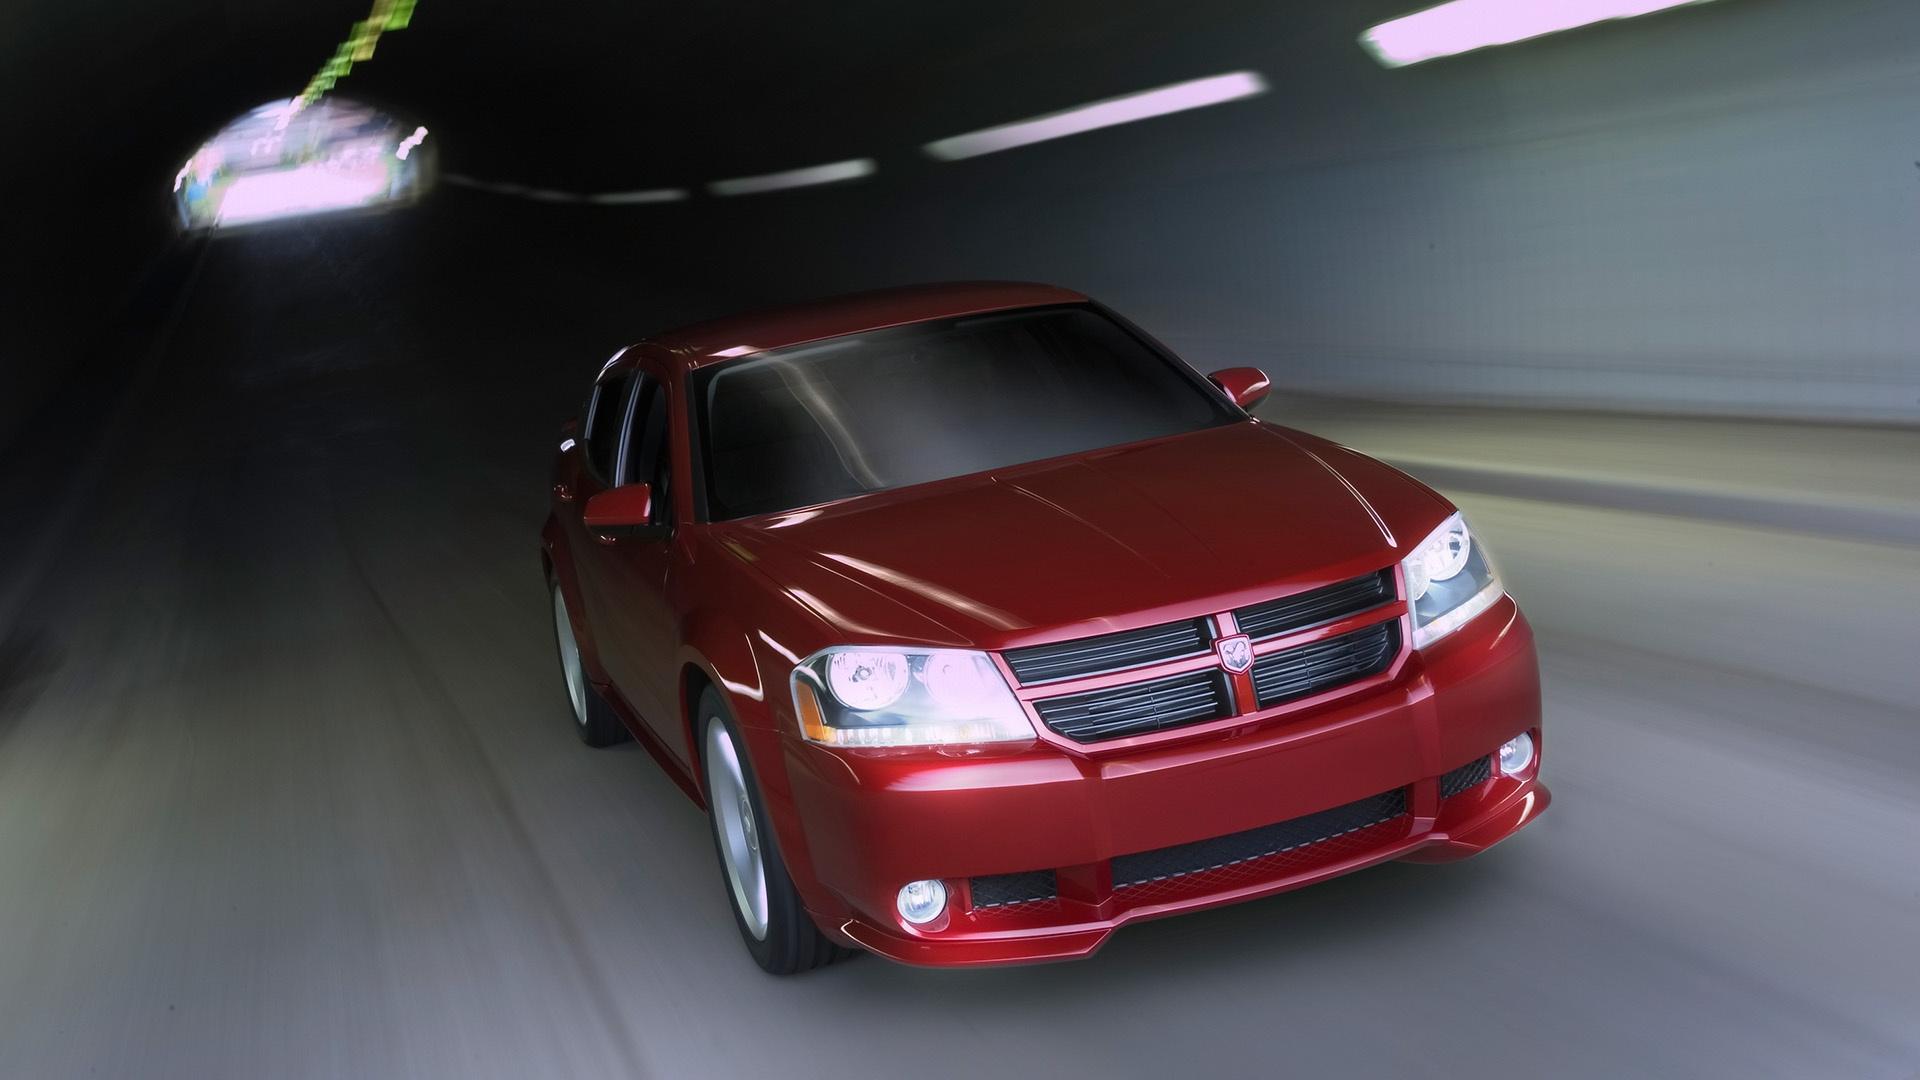 2006 Dodge Avenger Concept Front Angle Drive 1920x1080